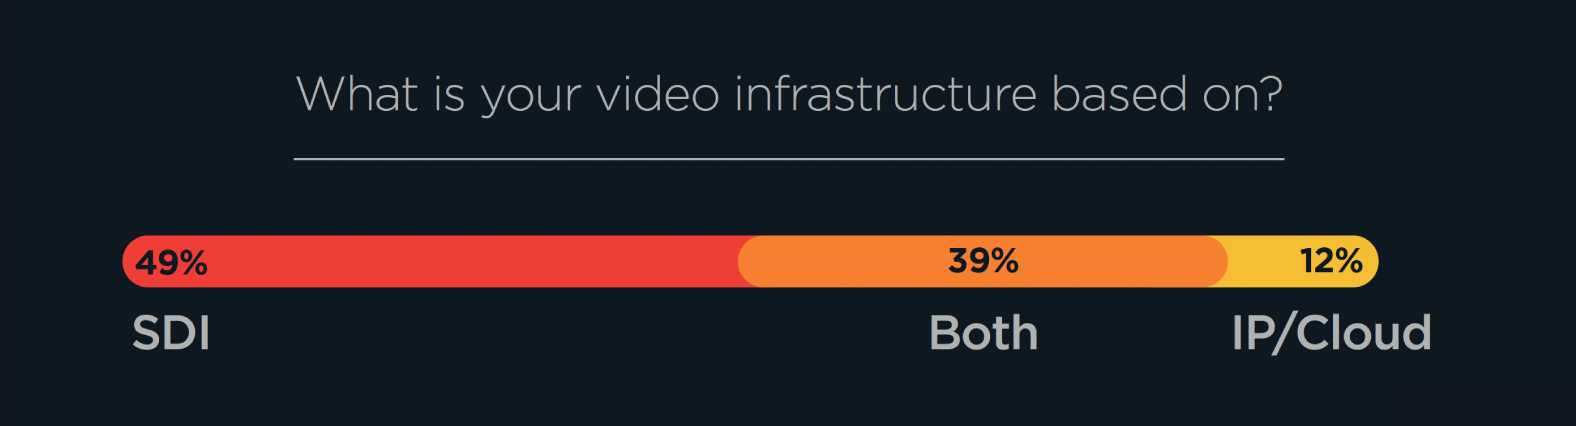 What is your video infrastructure based on?